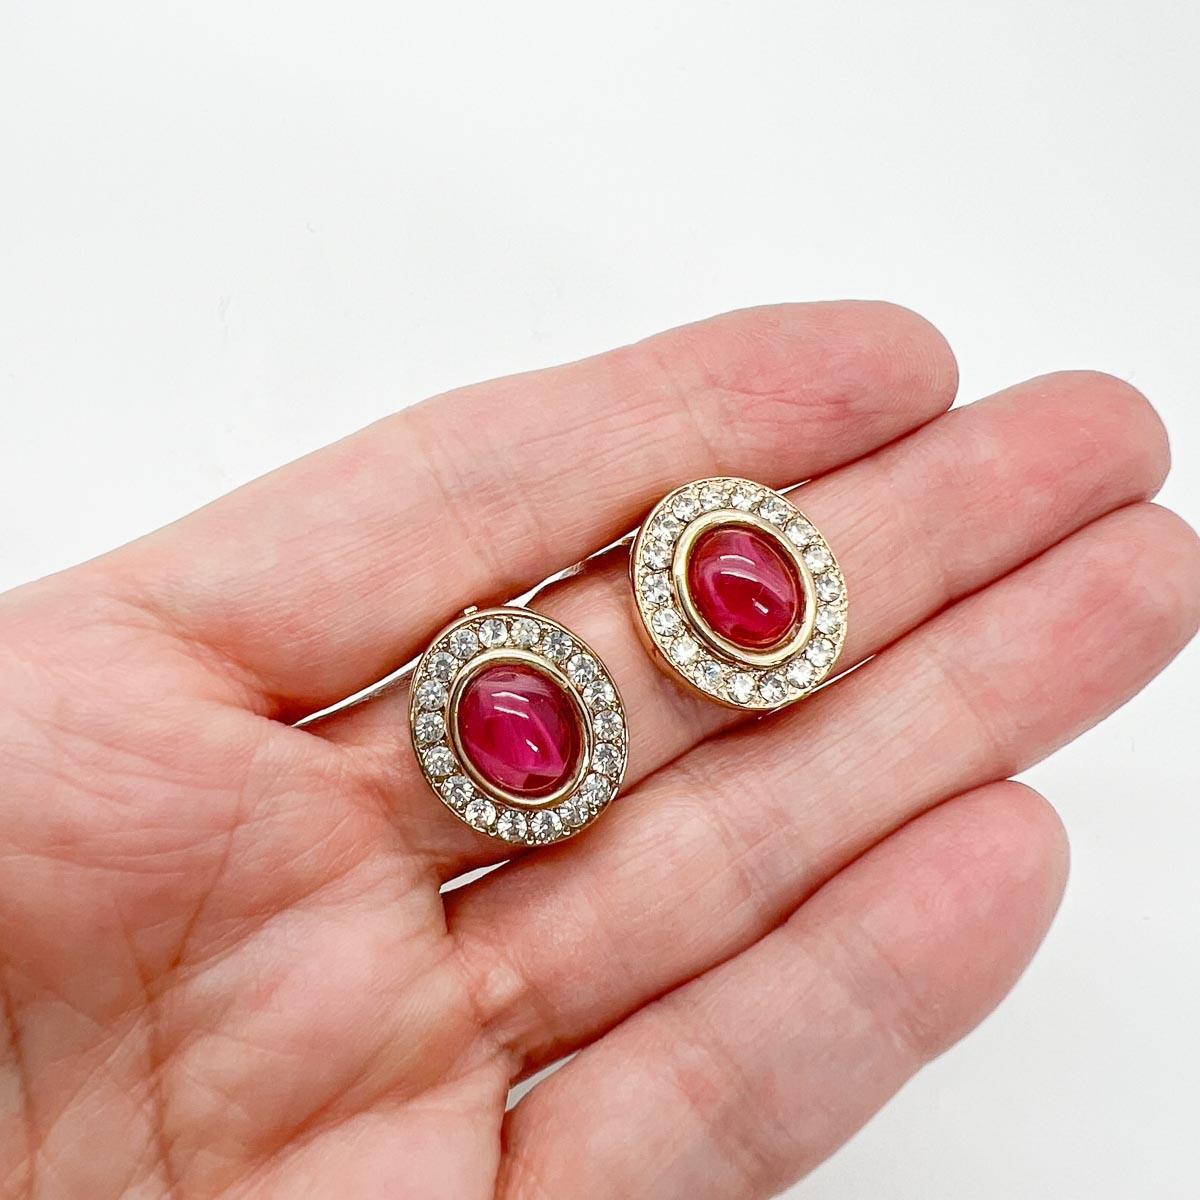 A beautiful pair of Vintage Ruby Cabochon Earrings. A cabochon stone always adds the look of luxury and has timeless appeal.
An unsigned beauty. A rare treasure. Just because a jewel doesn’t have a designer name, doesn’t mean that isn’t coveted. The